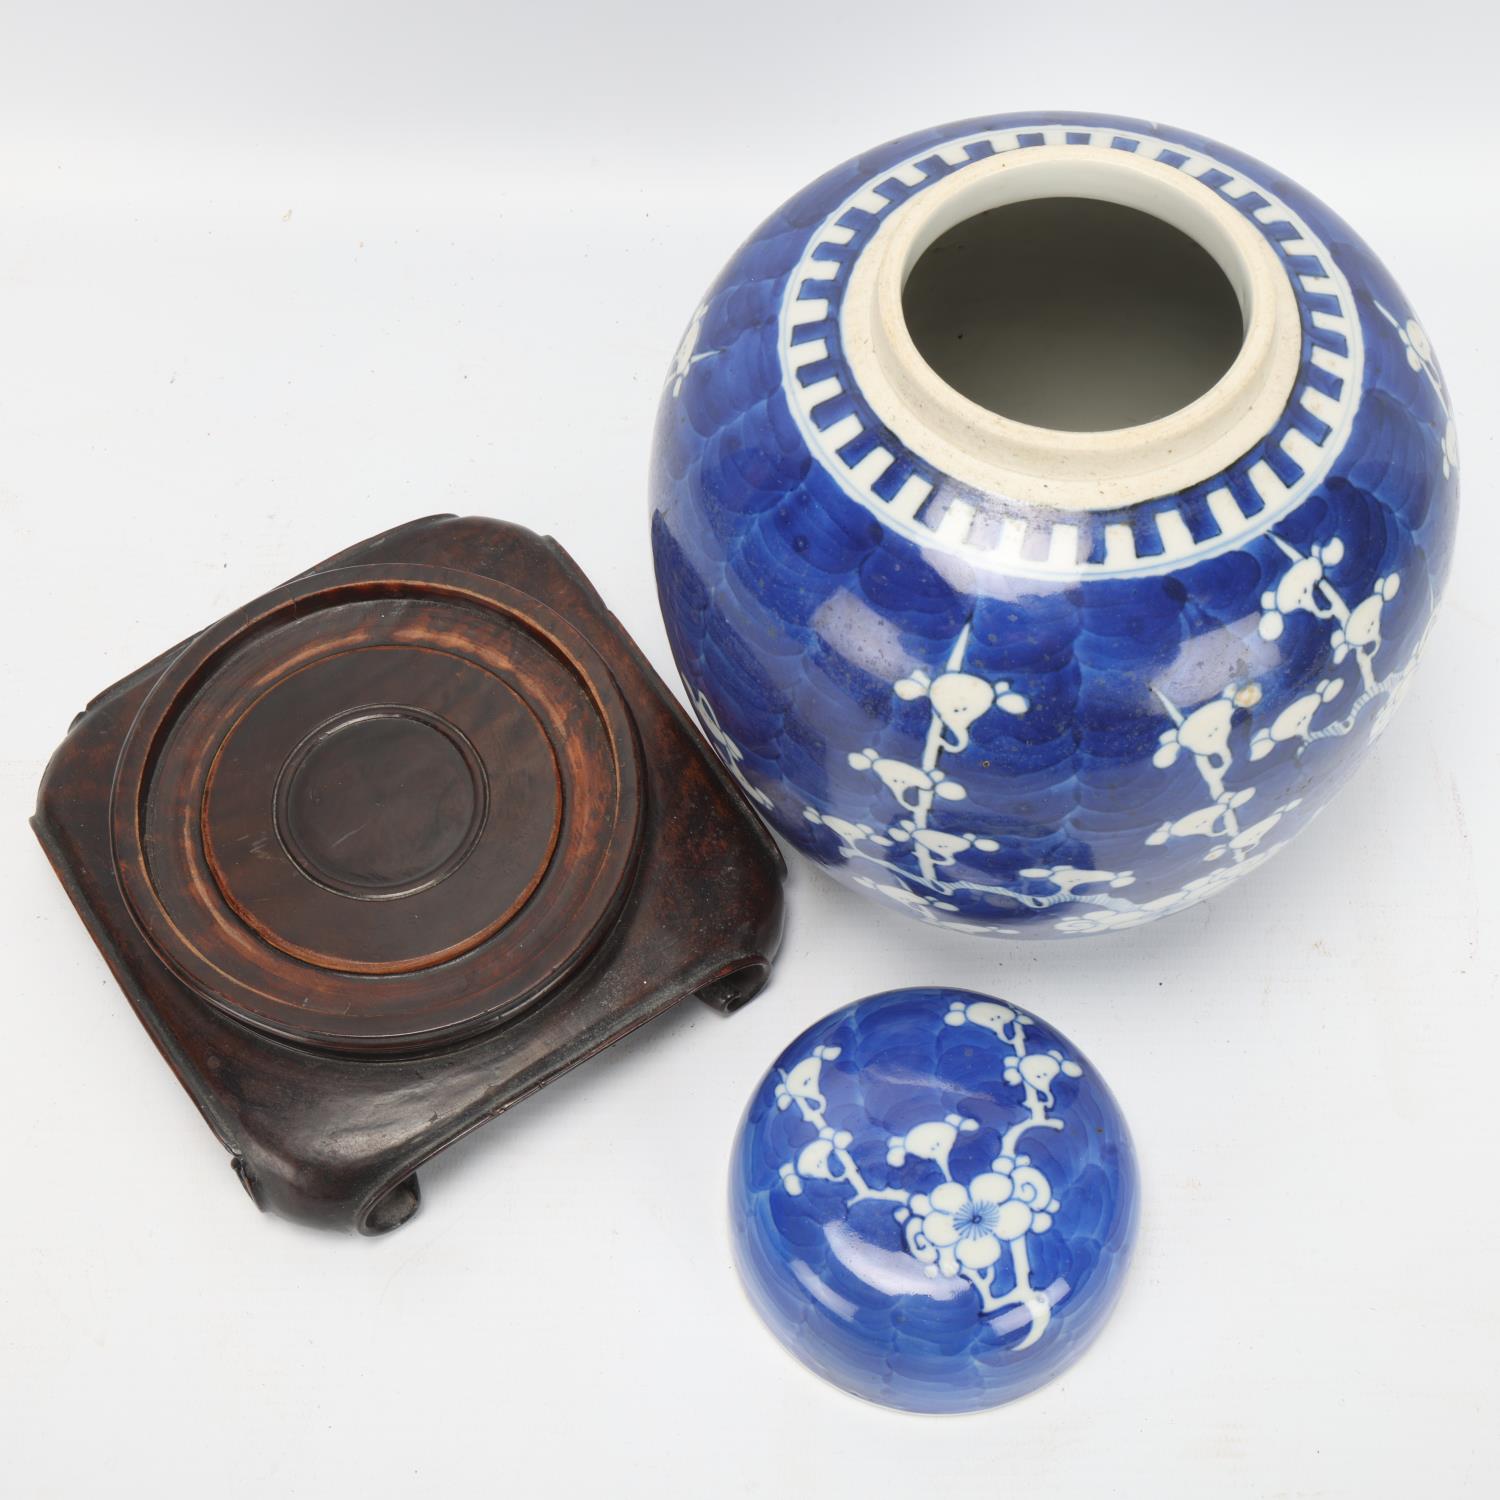 A Chinese blue and white porcelain ginger jar and cover, on original carved wood stand, overall - Image 3 of 3